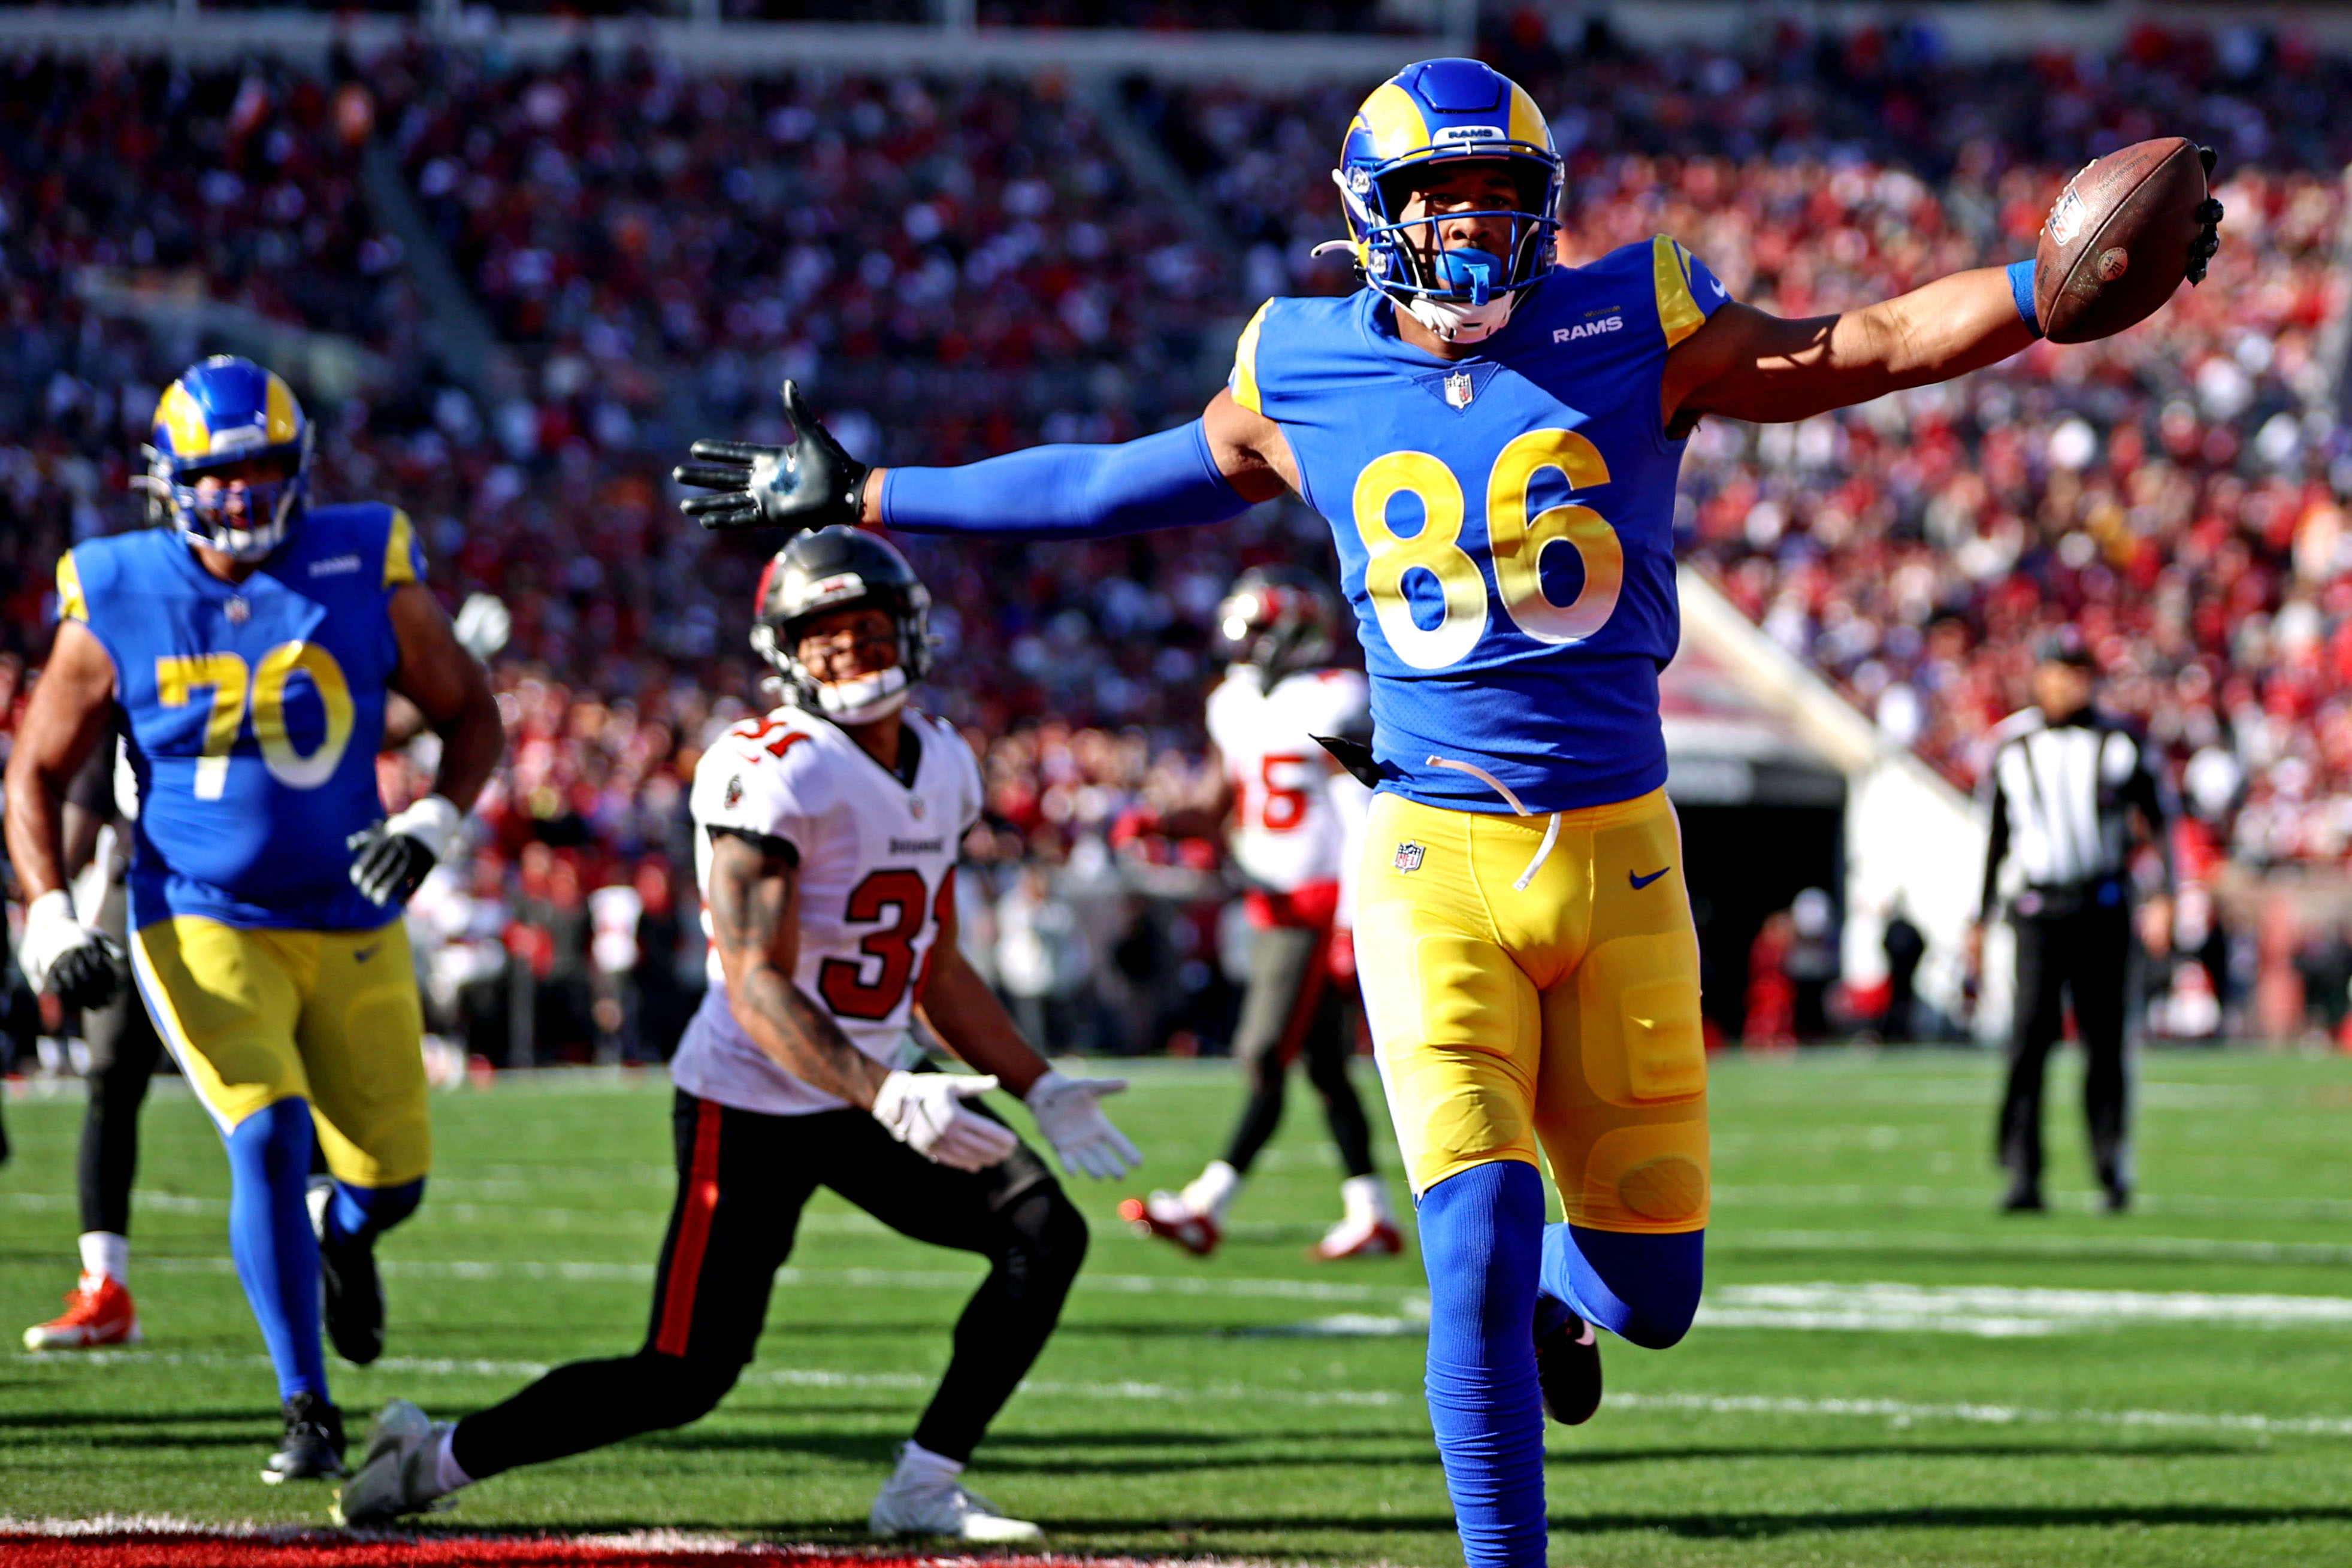 Los Angeles Rams tight end Kendall Blanton (86) scores a touchdown against Tampa Bay Buccaneers safety Antoine Winfield Jr. (31) during the first quarter in a NFC Divisional playoff football game at Raymond James Stadium.